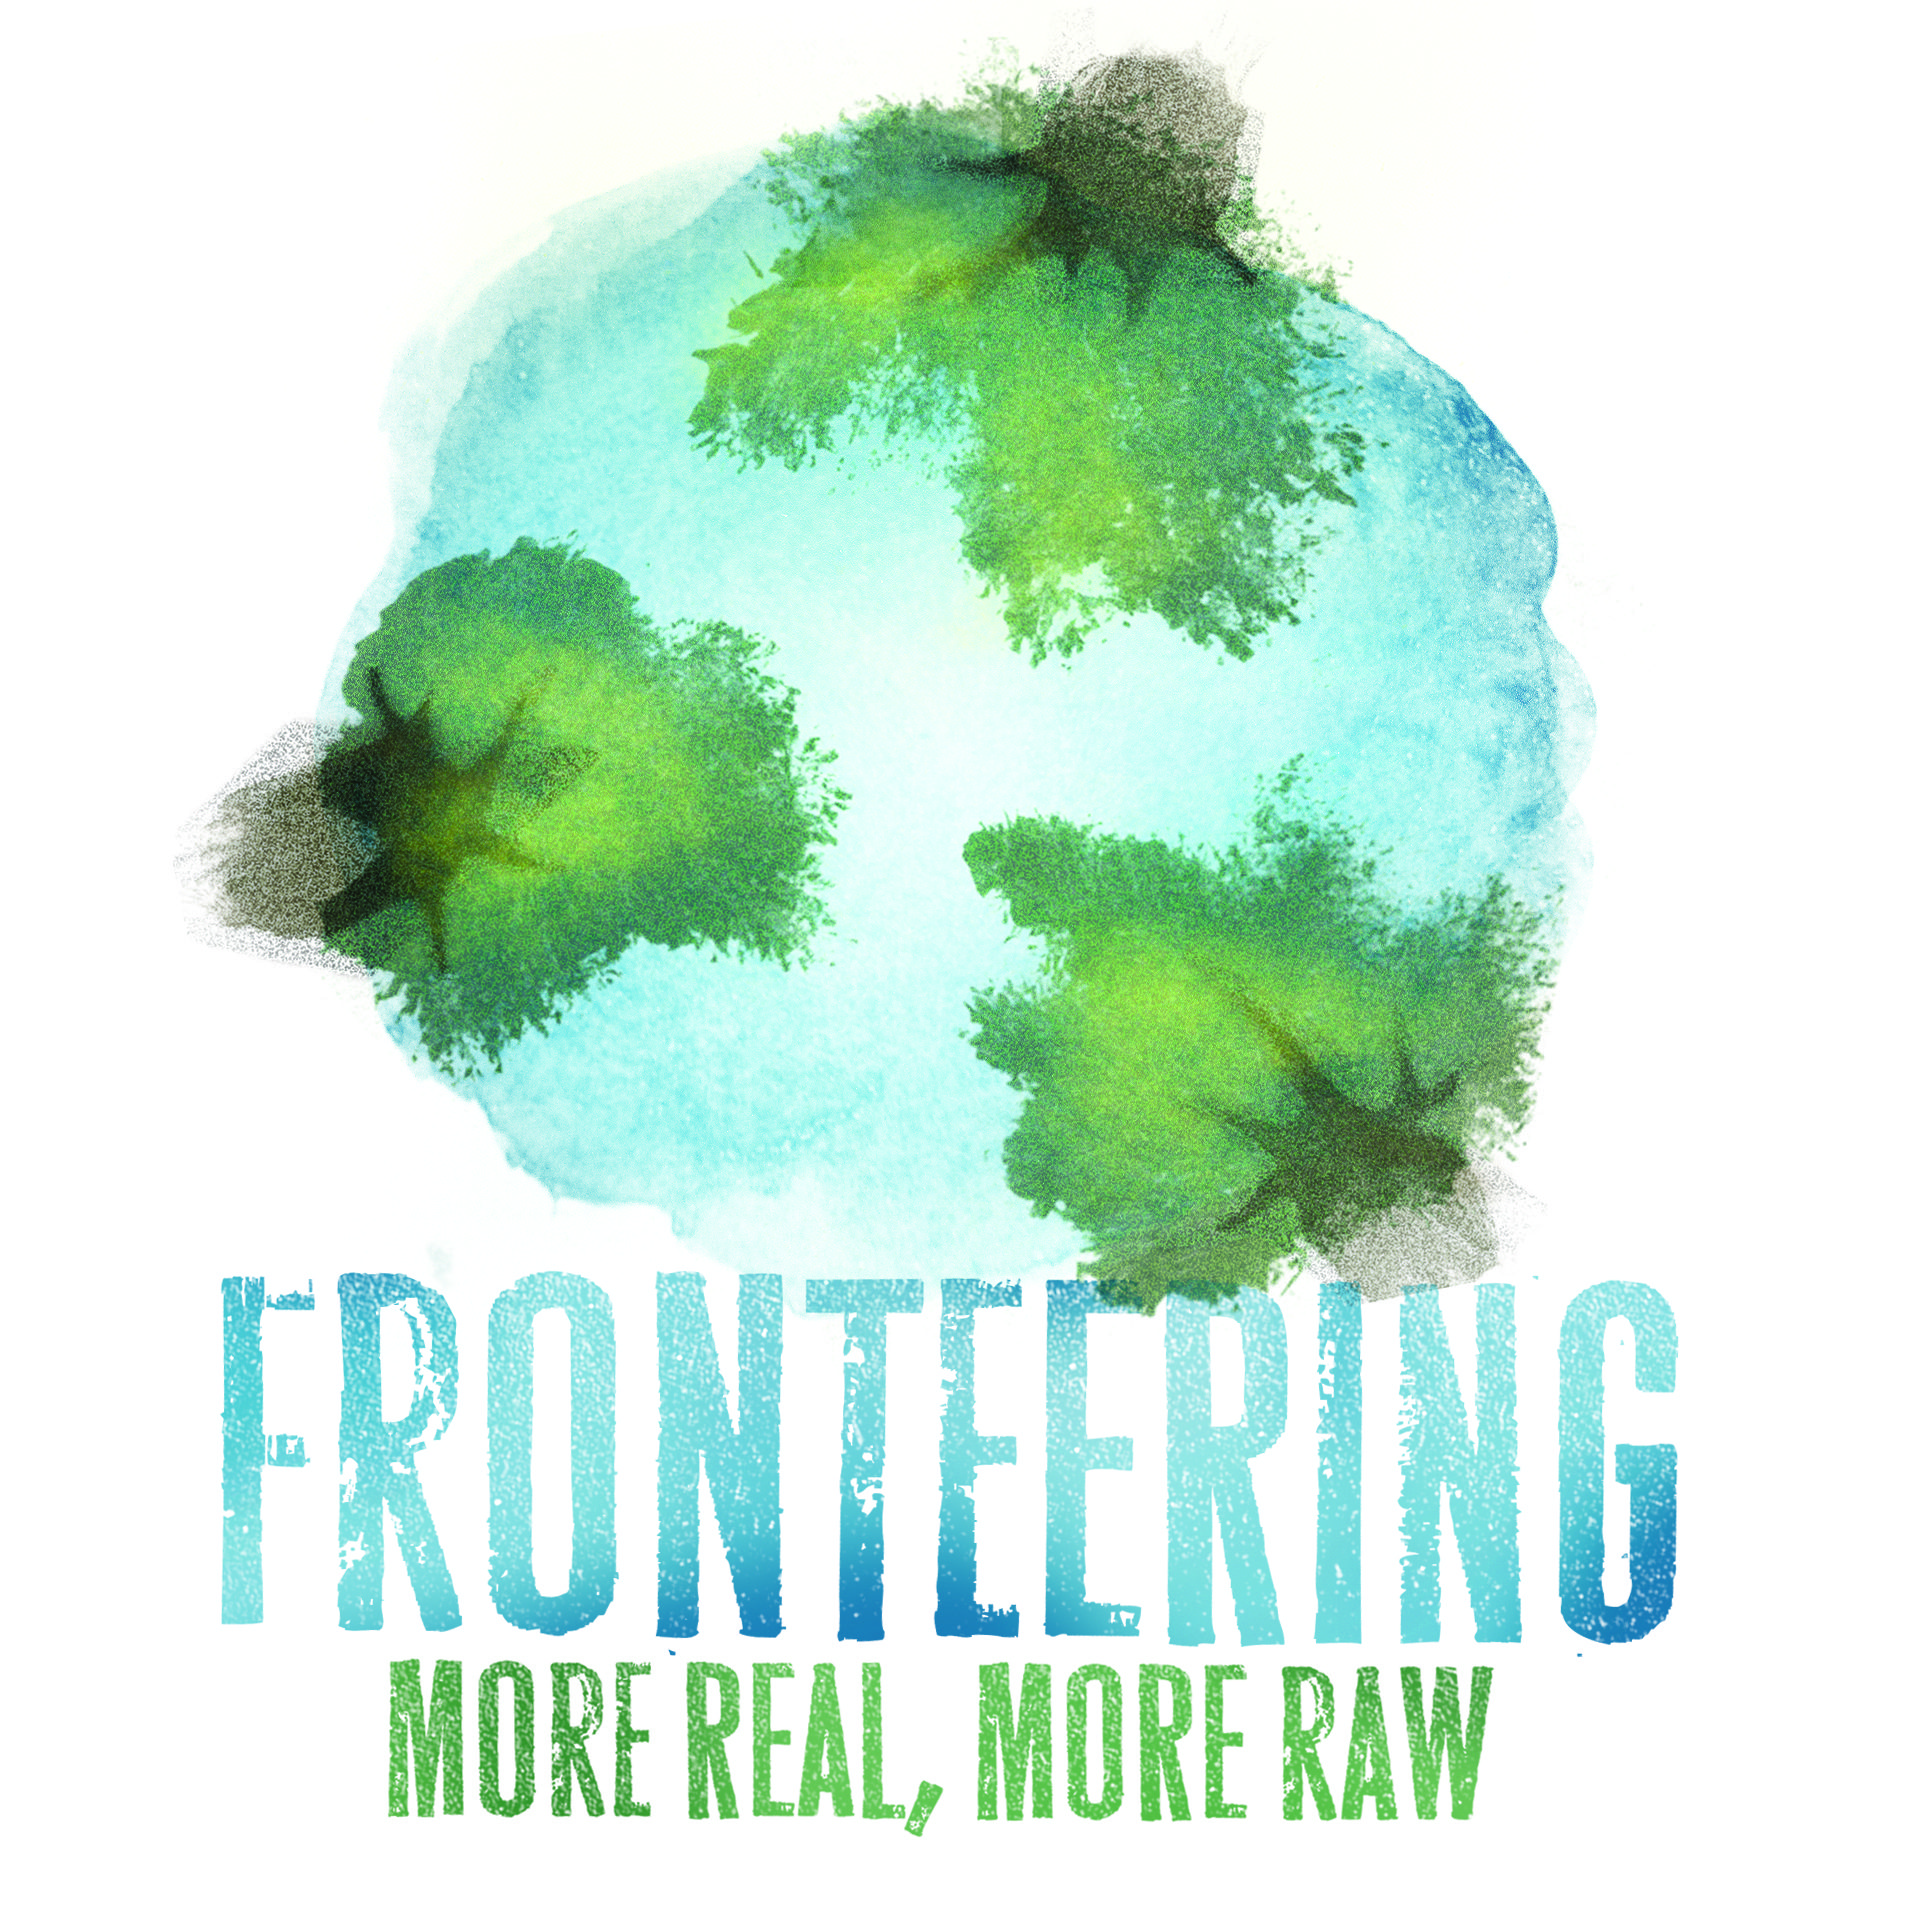 Image of Fronteering's logo, a watercolor globe with the company's name.